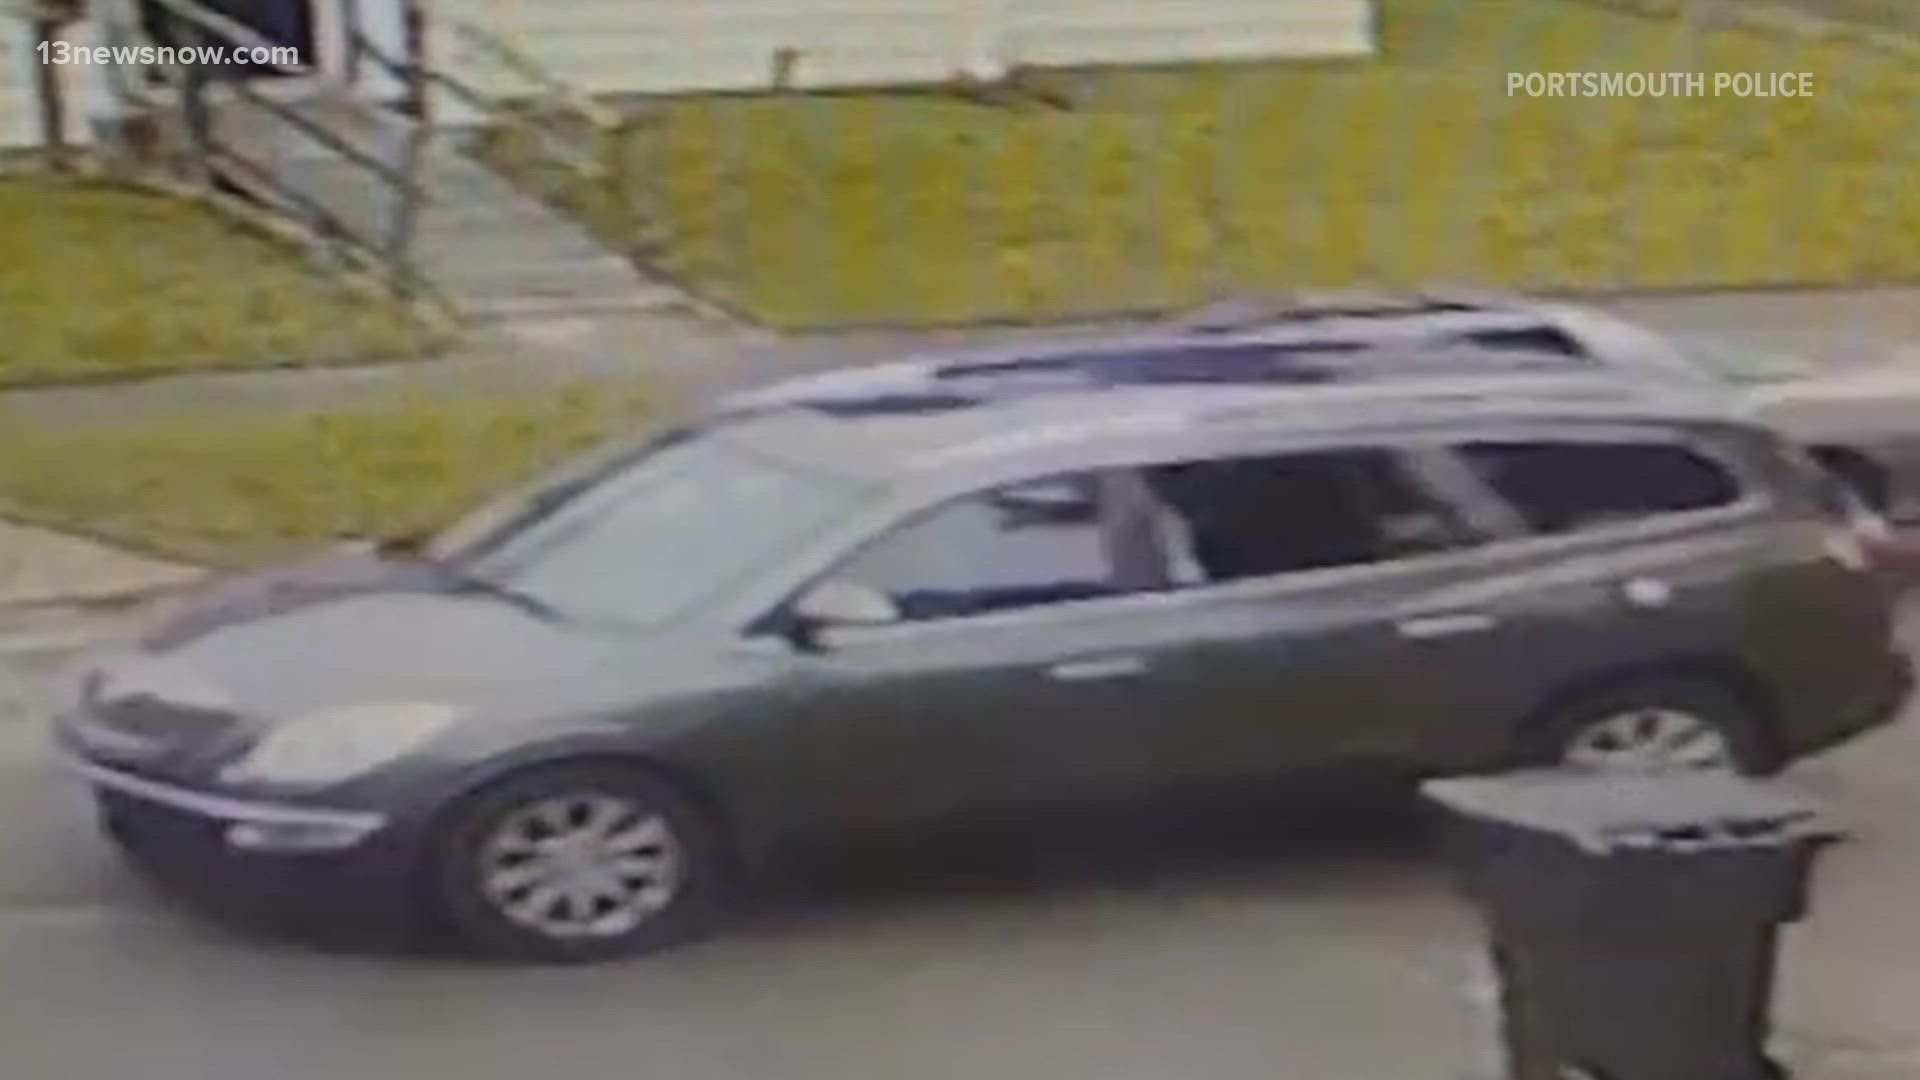 Detectives believe the suspect vehicle is a 2008-2012 Buick Enclave with an aftermarket gas cap and unknown tags.